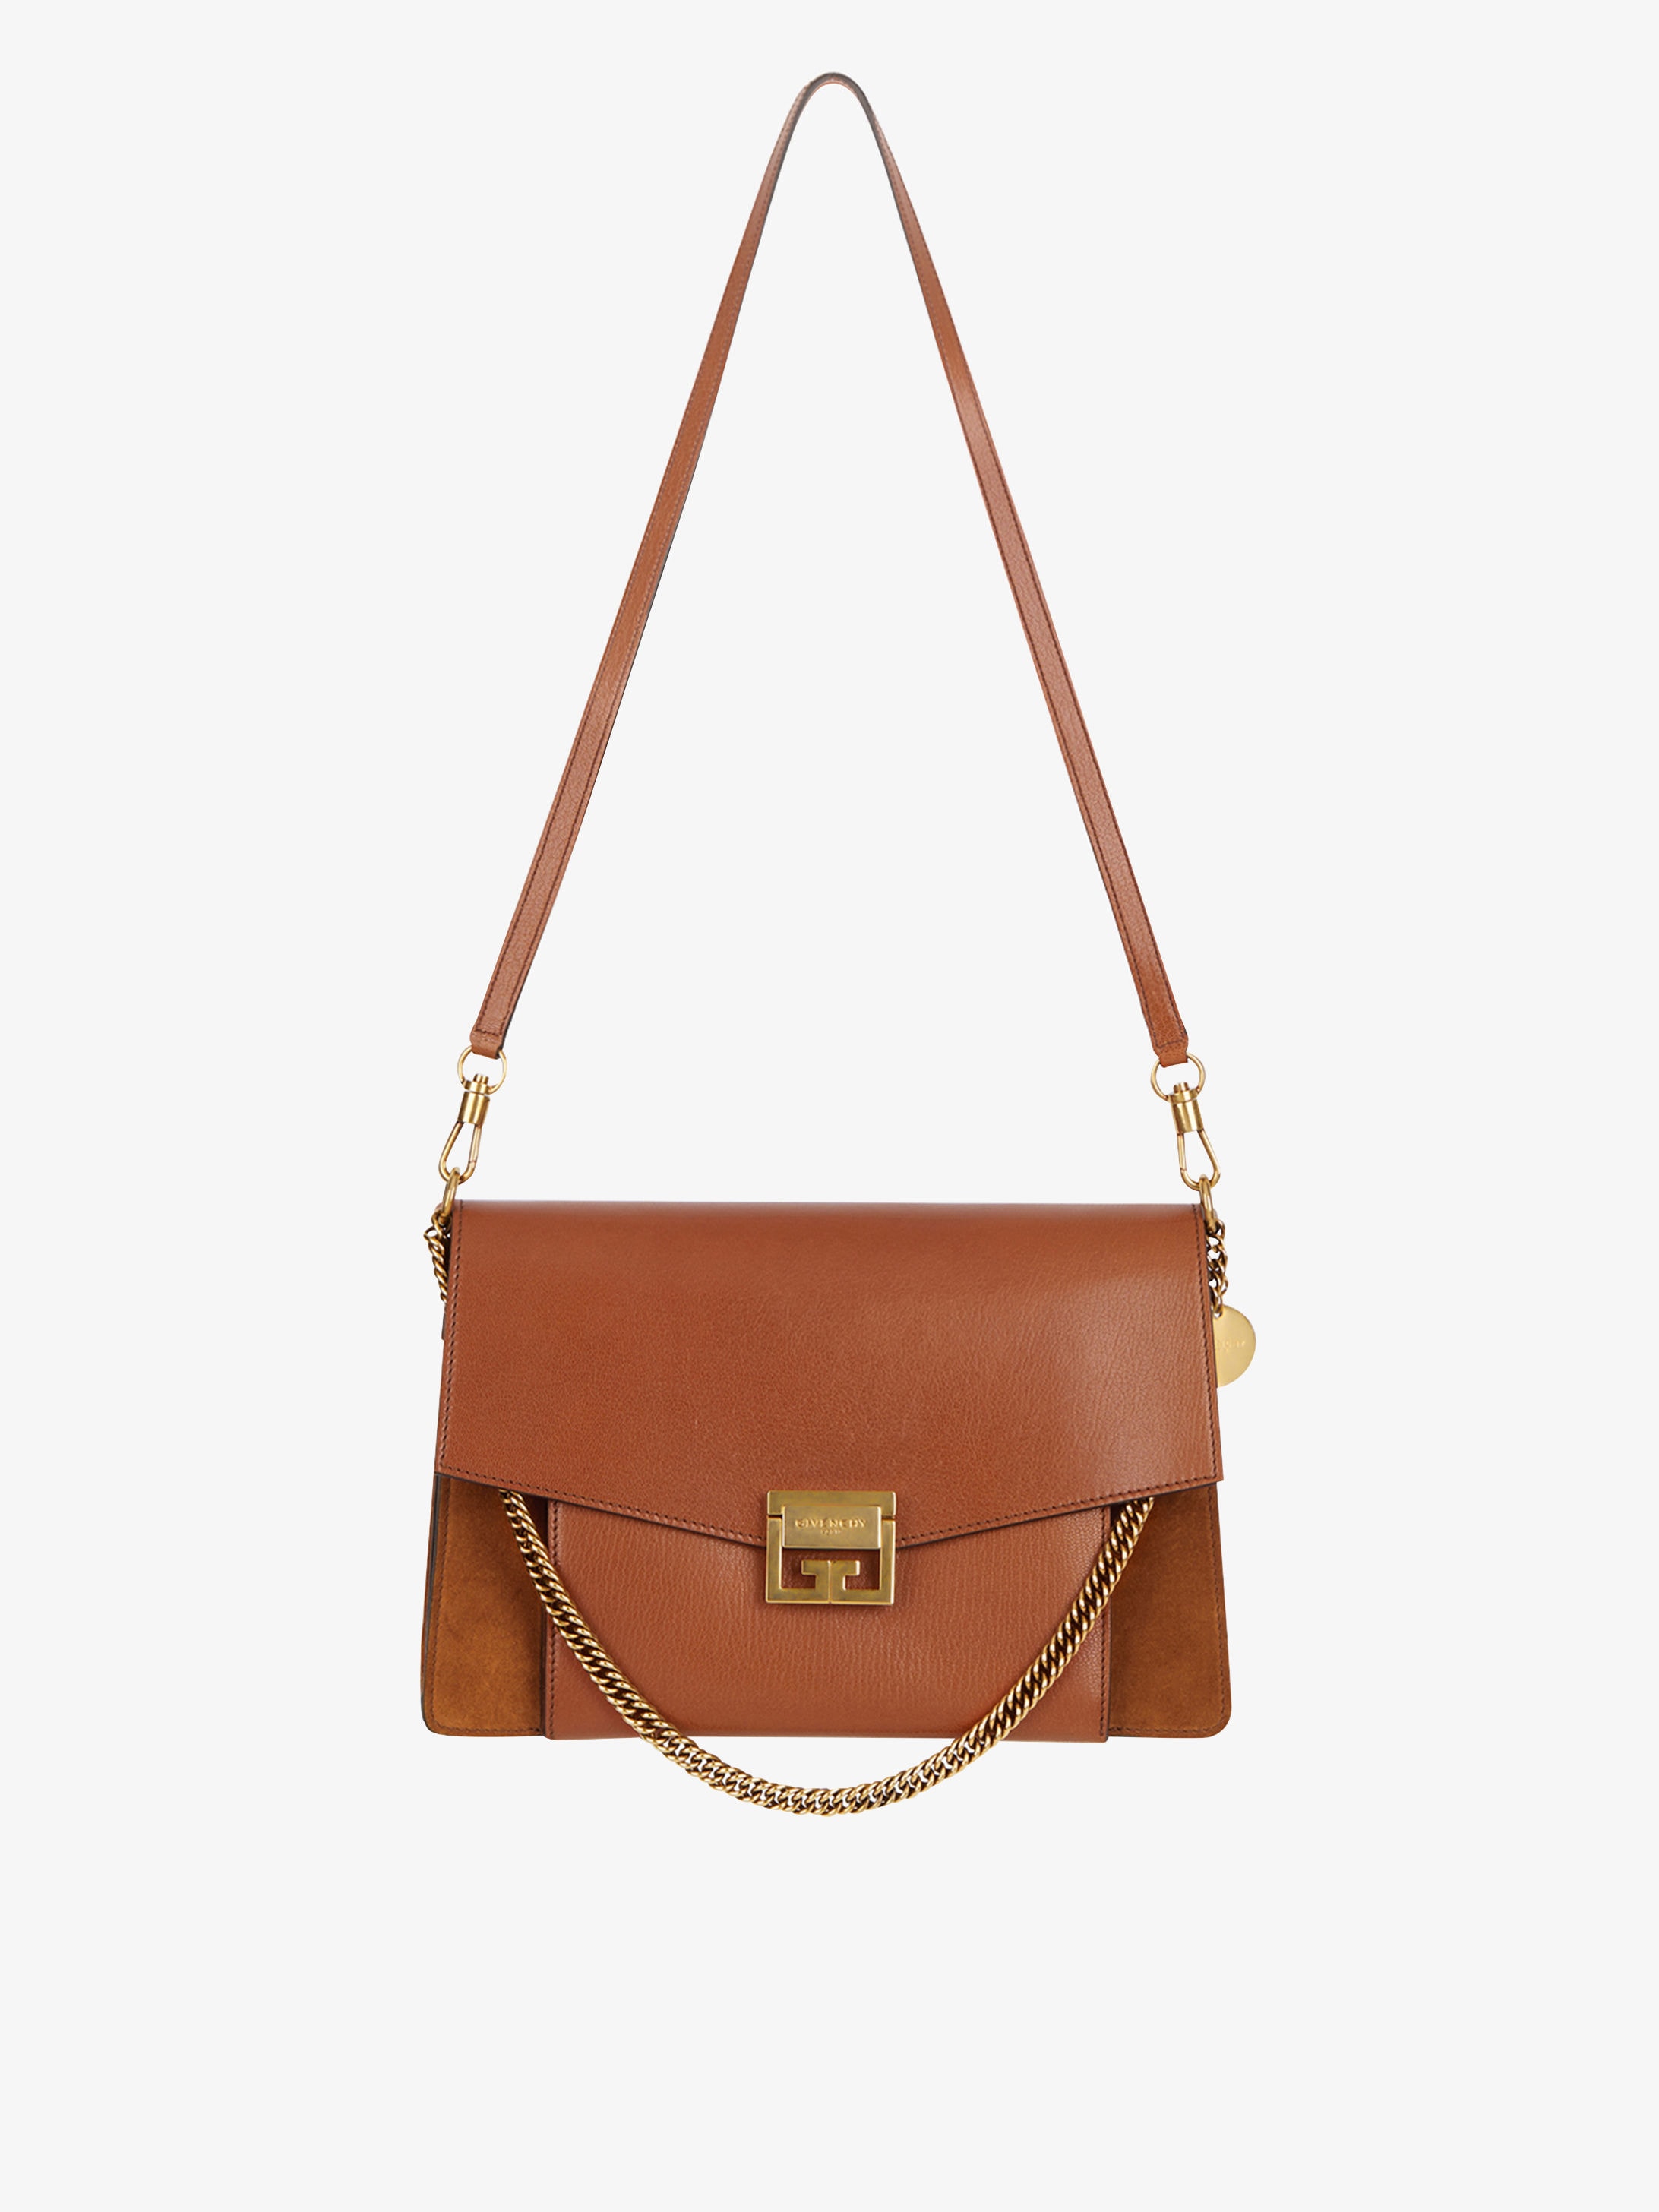 Medium GV3 bag in leather and suede | GIVENCHY Paris